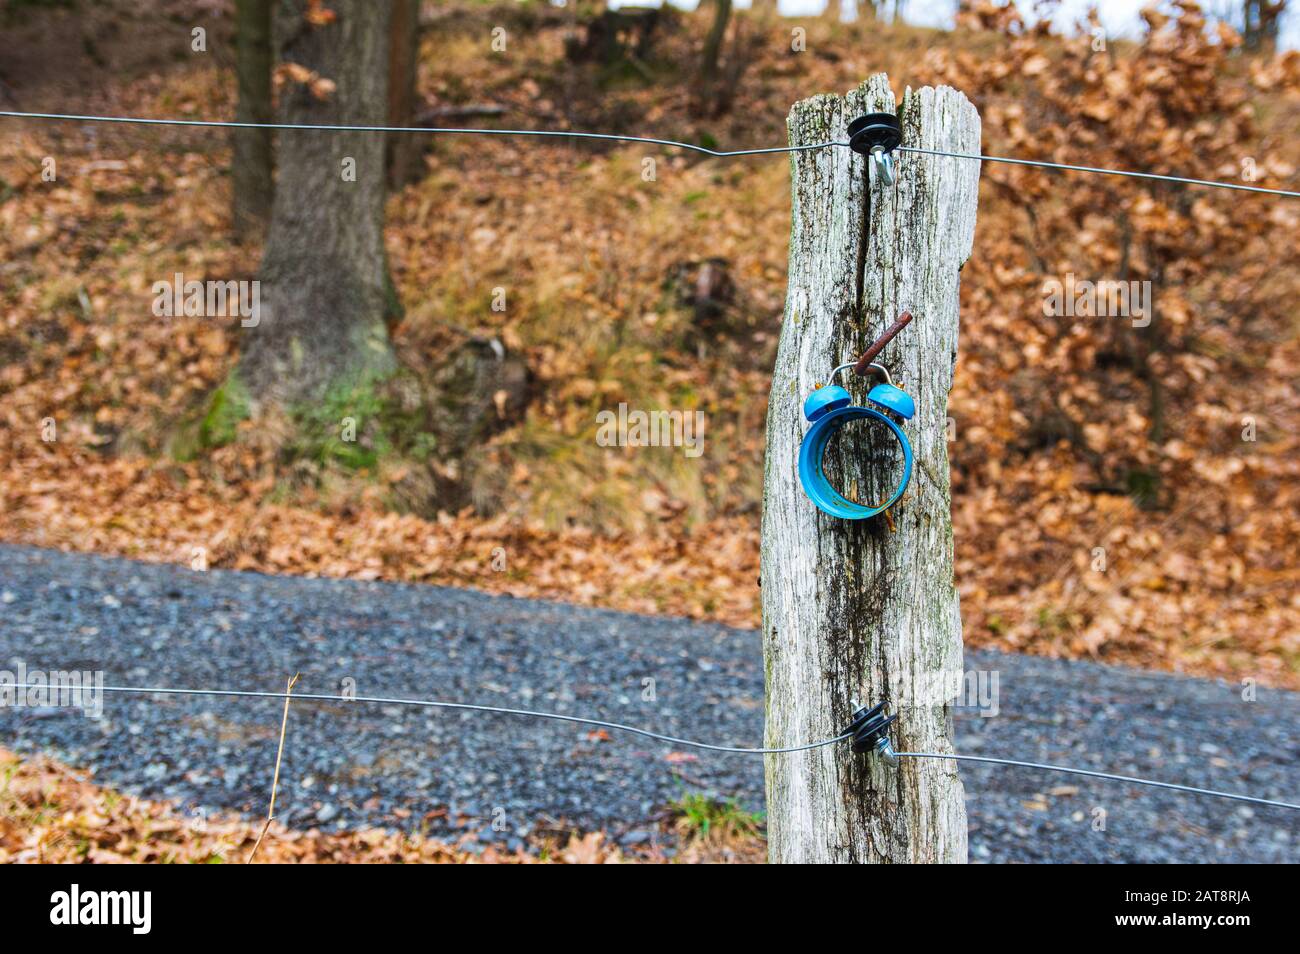 housing of a rusty old alarm clock hanging on a wooden fence post in rural autumn landscape Stock Photo